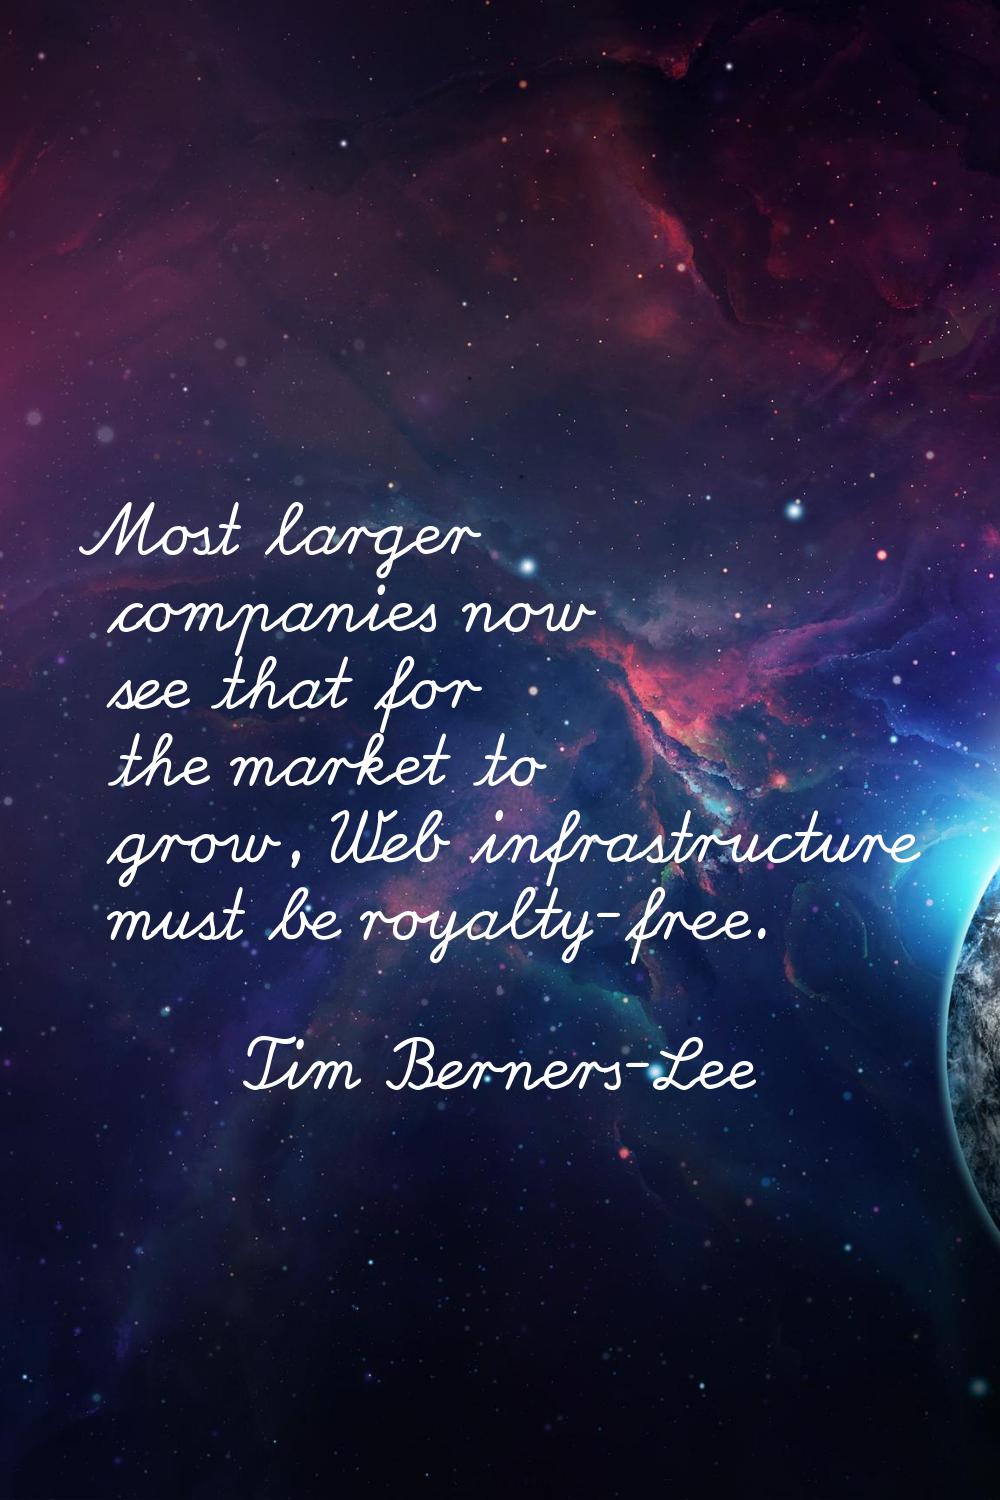 Most larger companies now see that for the market to grow, Web infrastructure must be royalty-free.